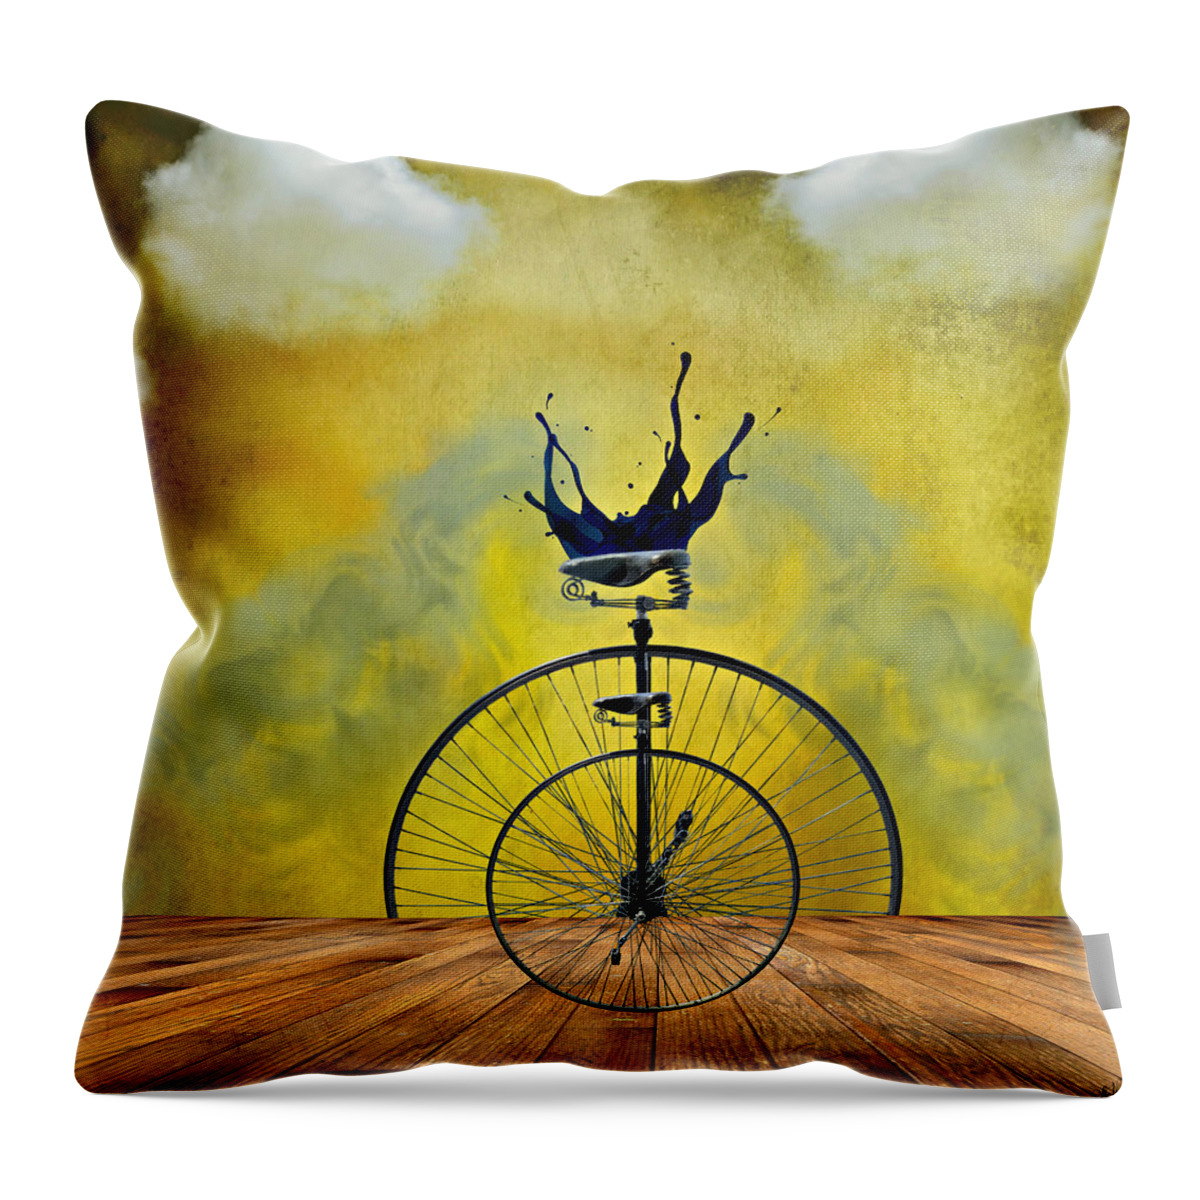 Blind Date Throw Pillow featuring the digital art Blind Date by Ally White